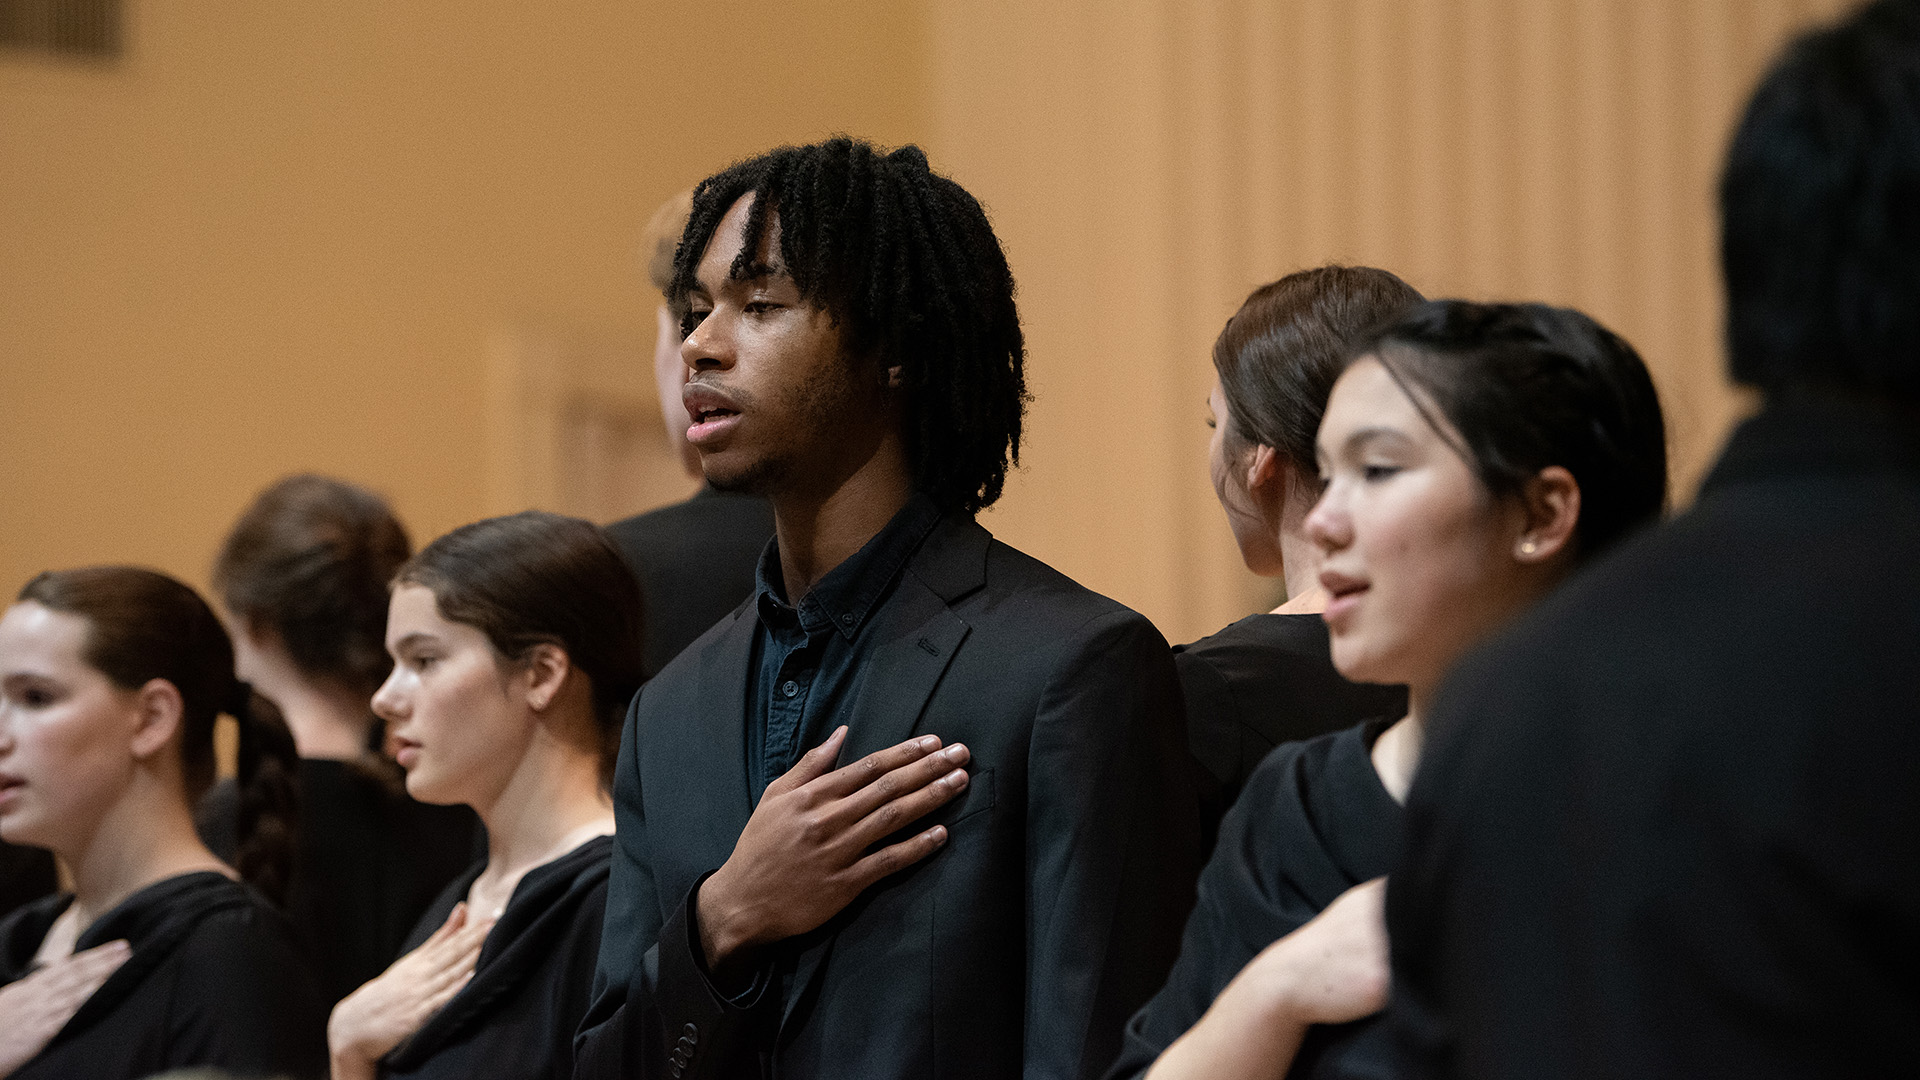 The Cleveland Orchestra Youth Chorus